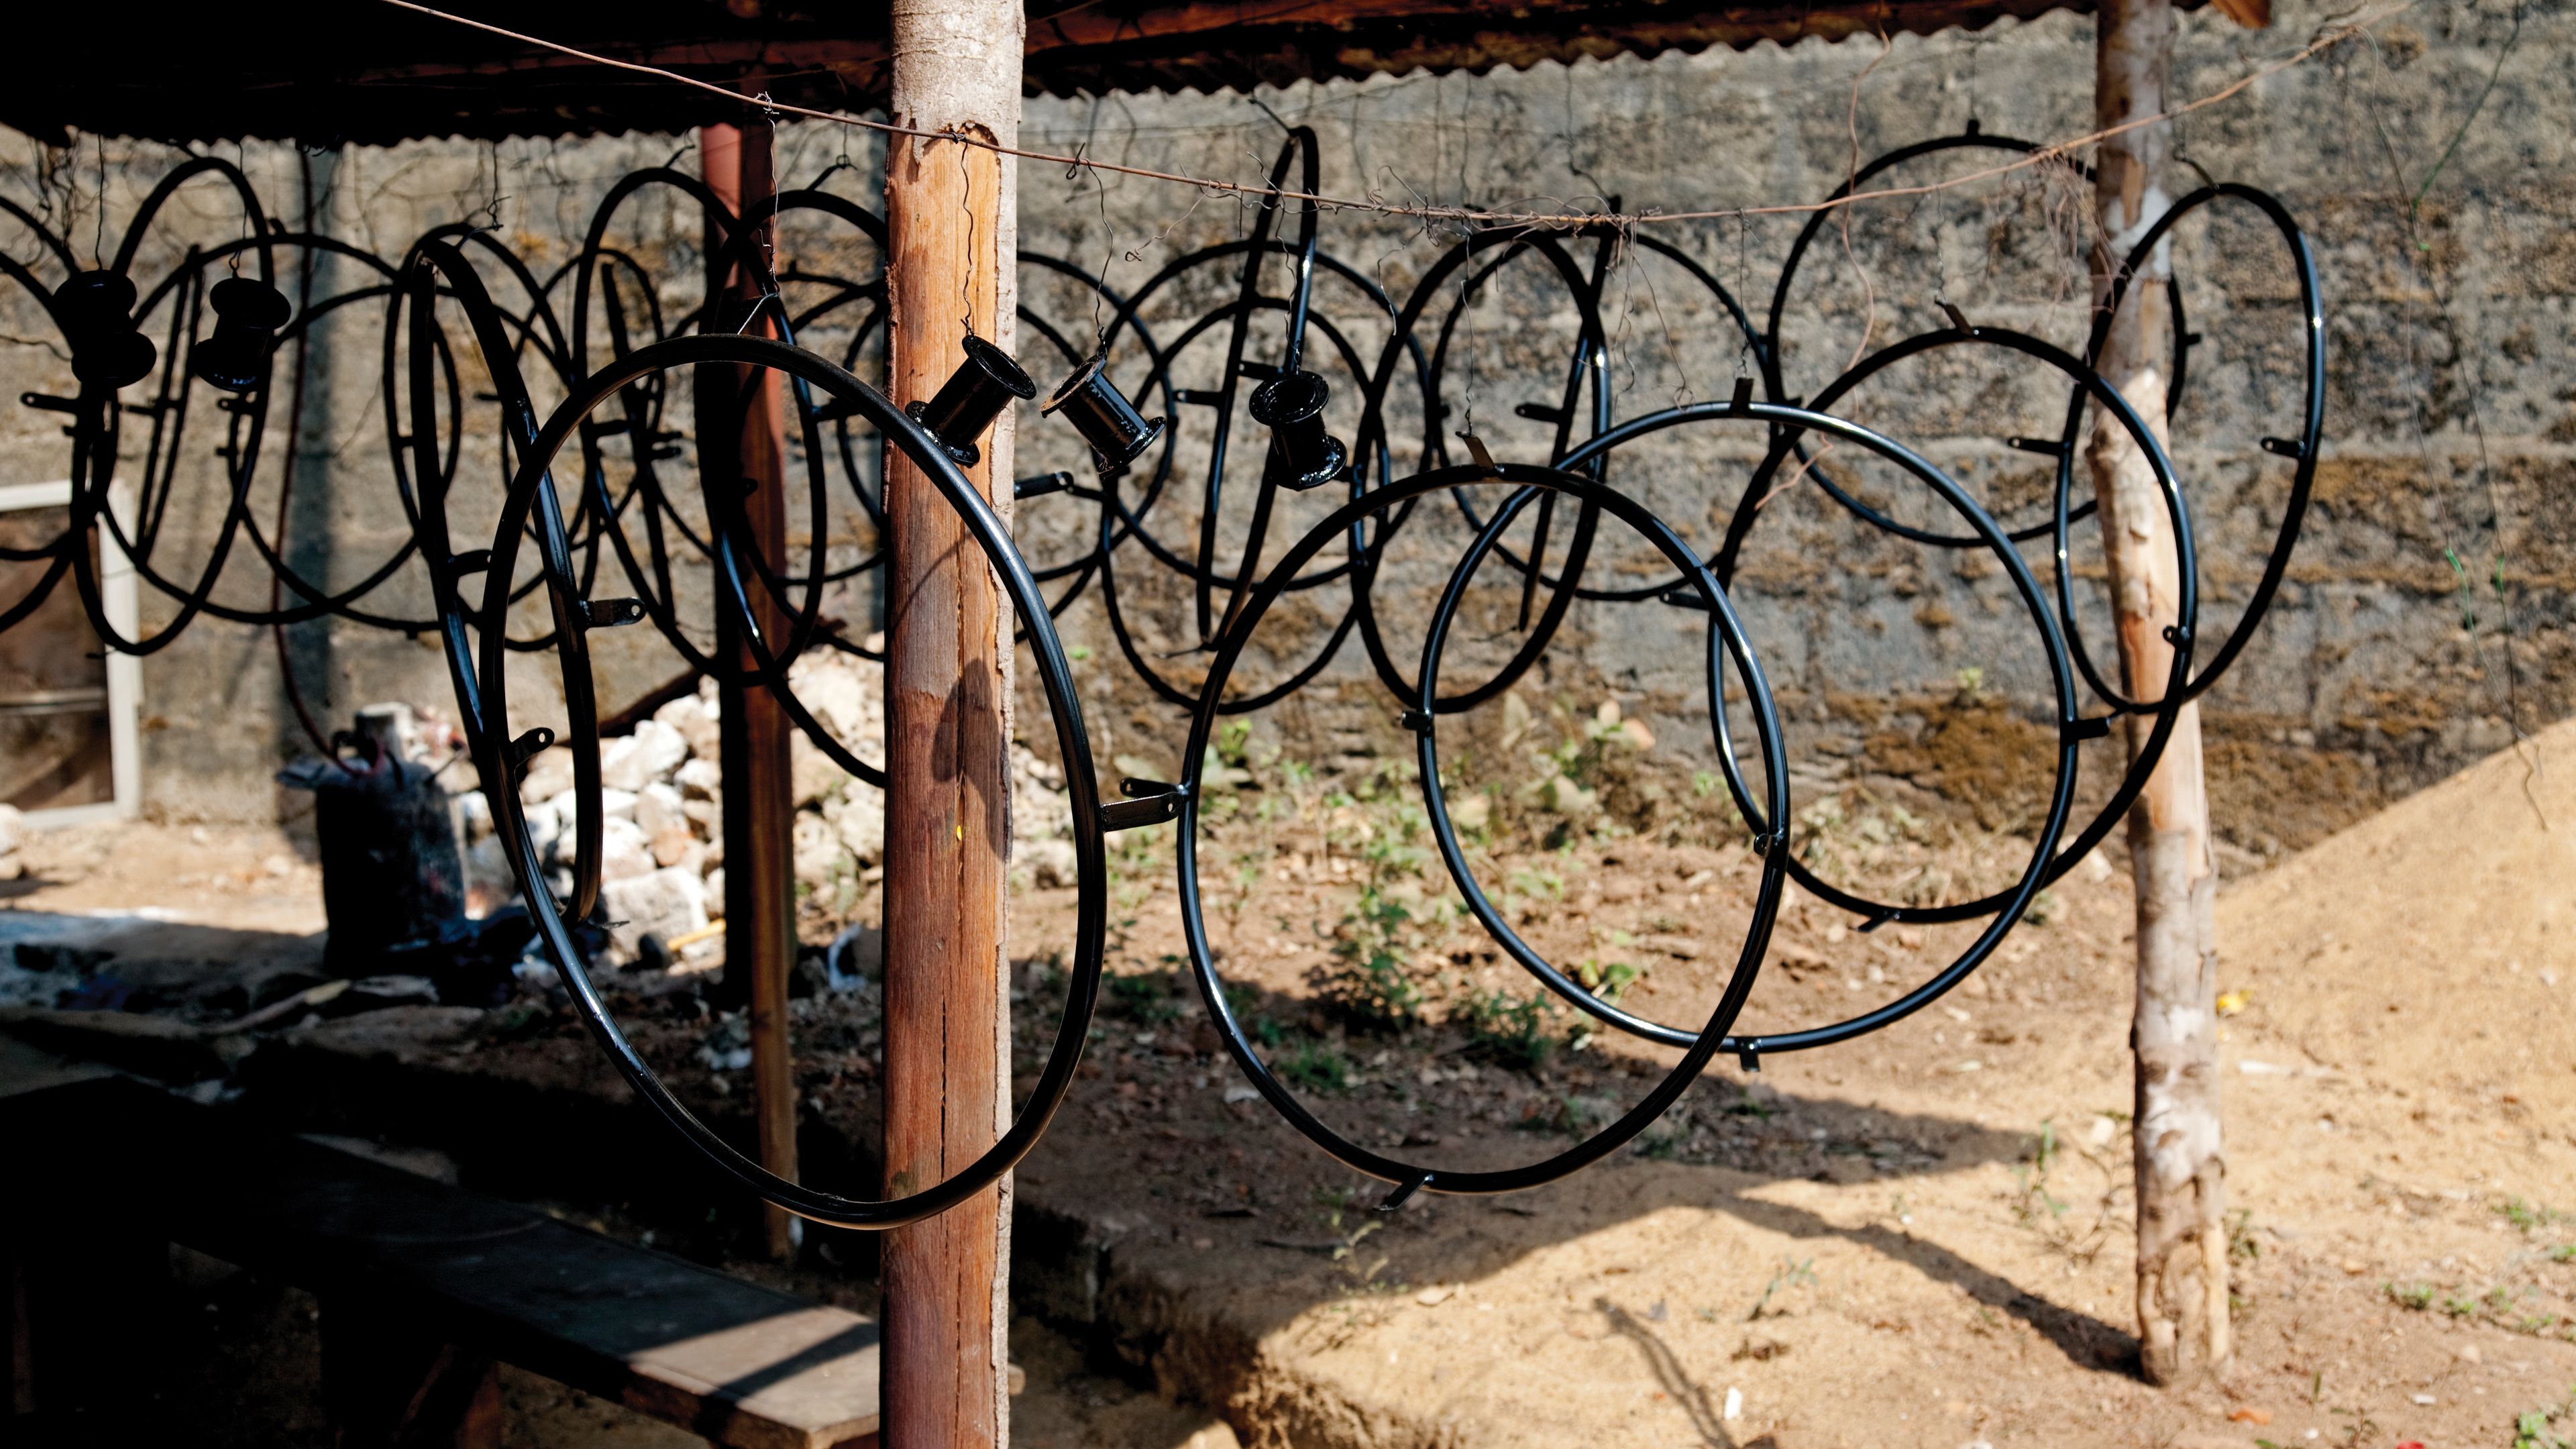 Many round wheelchair parts hanging down from a string in Africa.